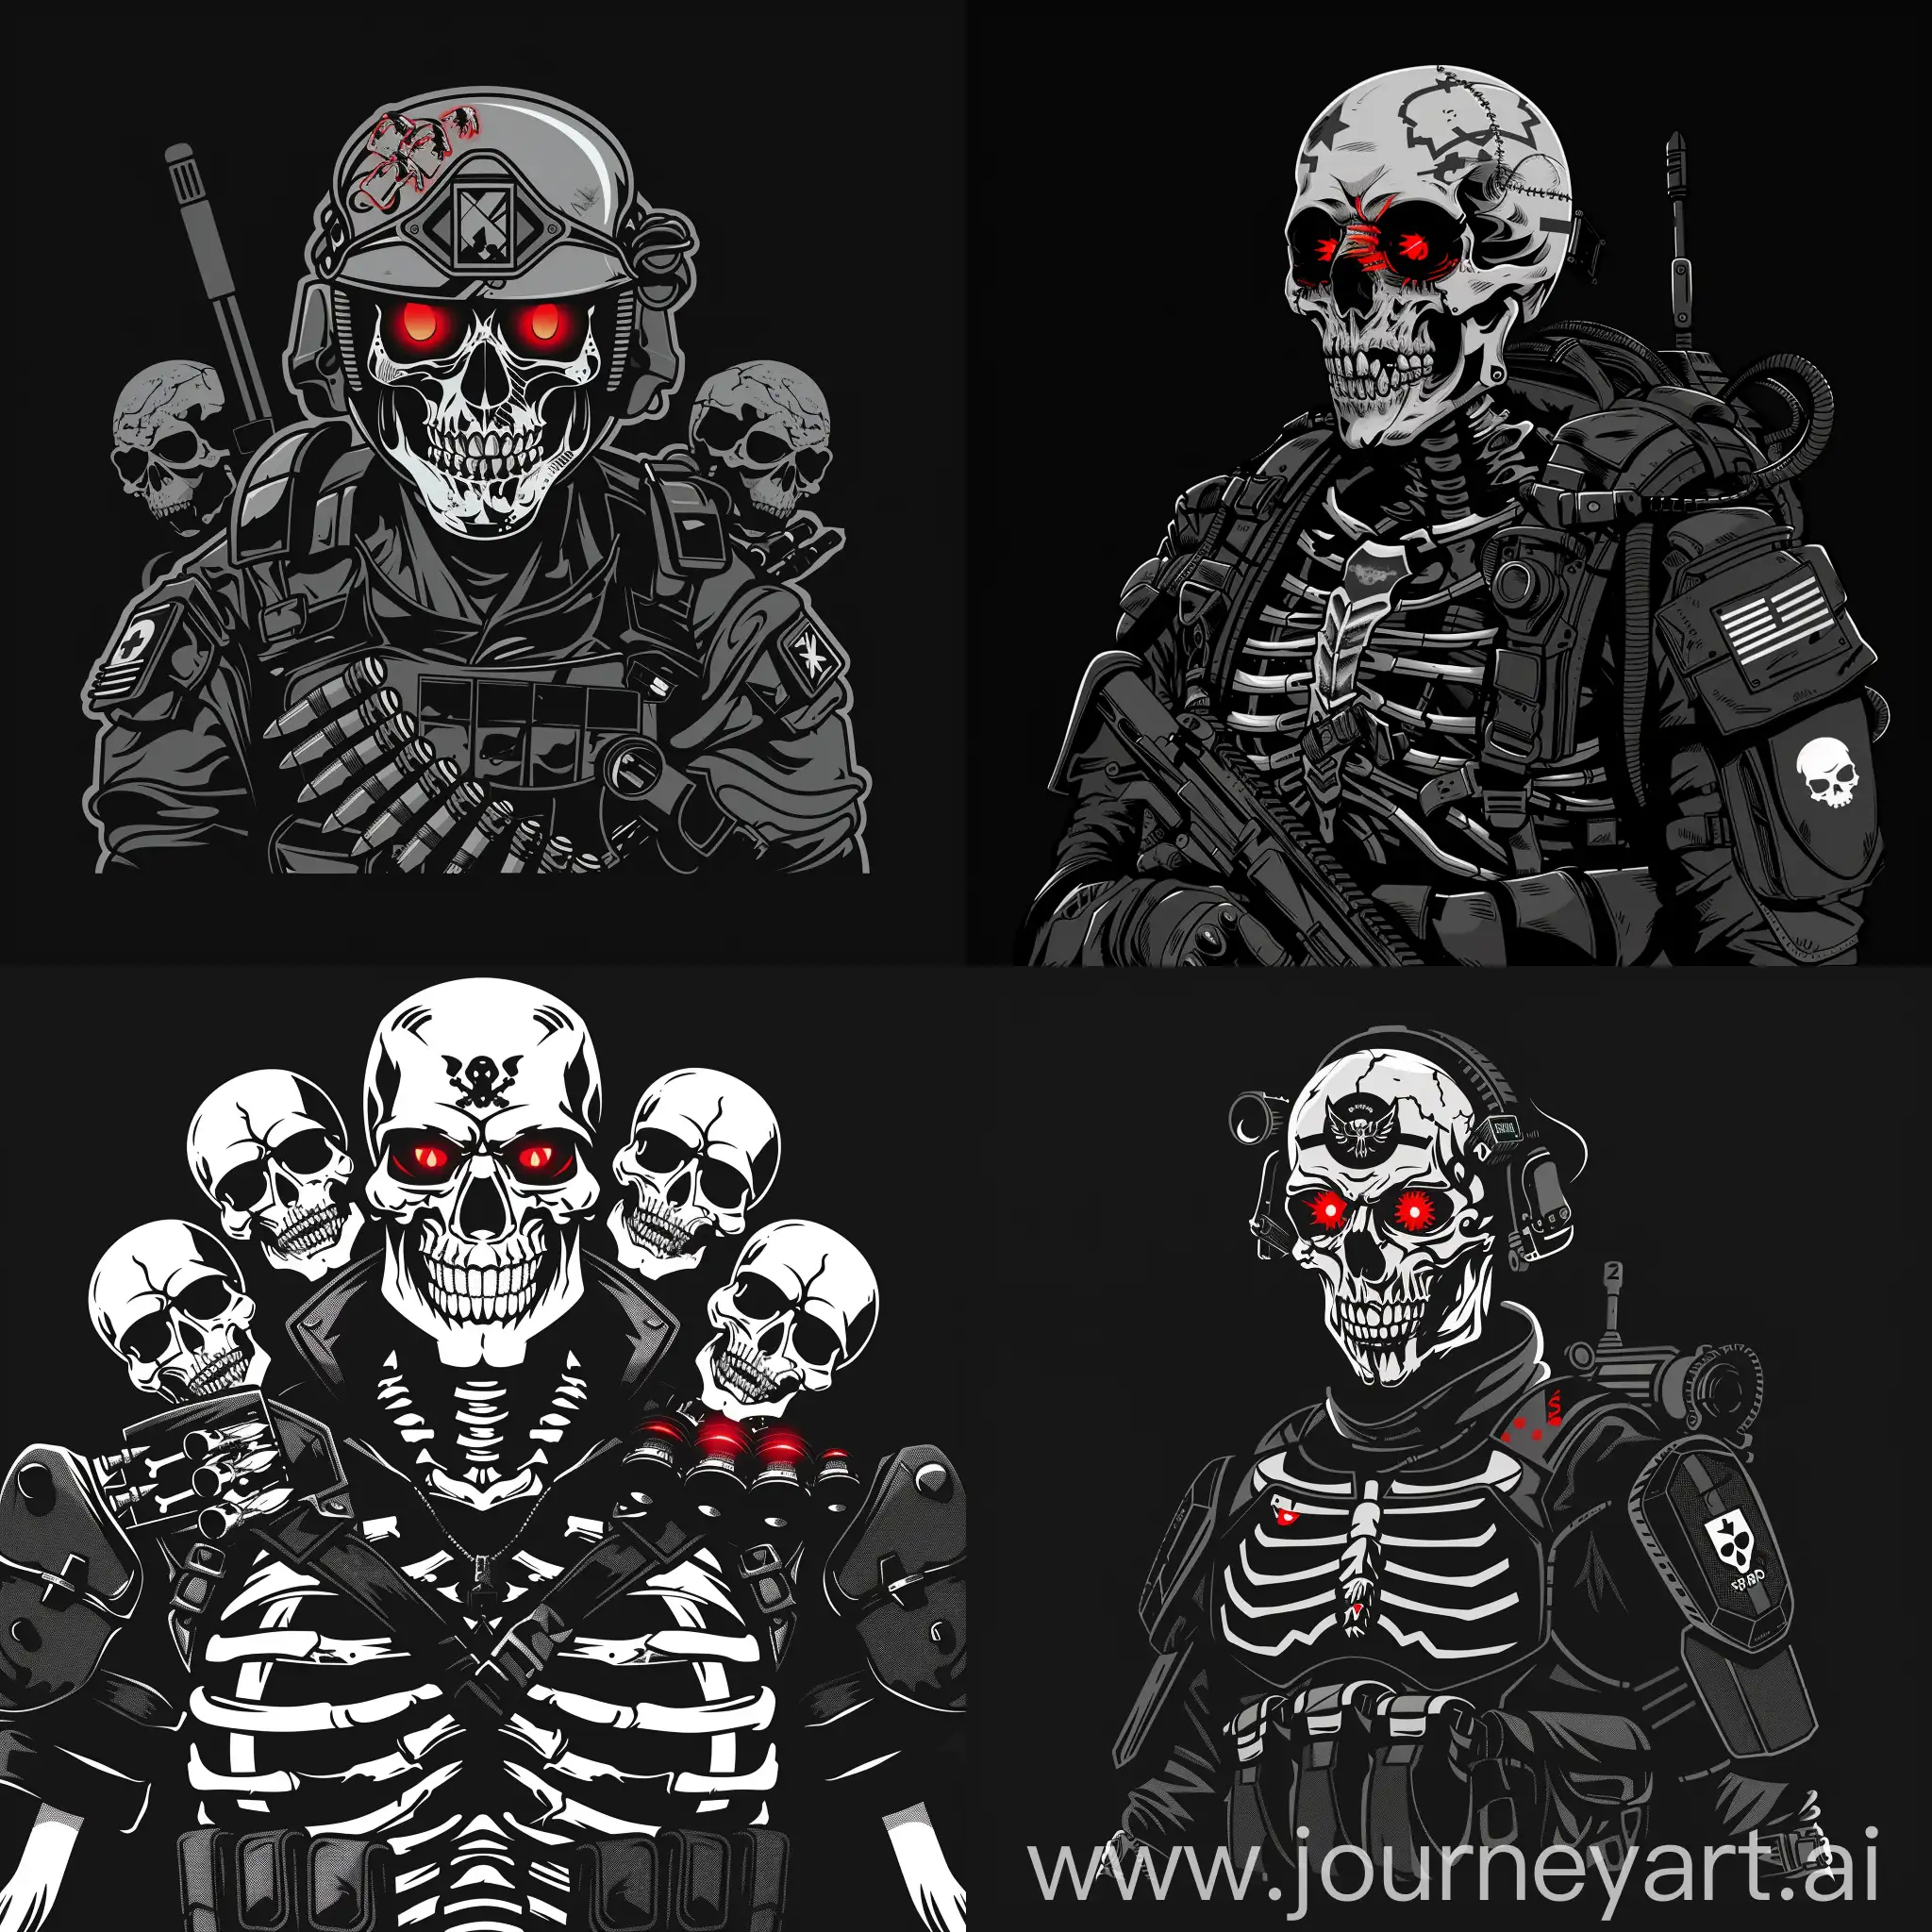 Glowing-RedEyed-Undead-Soldiers-in-Modern-Military-Gear-on-a-Black-Background